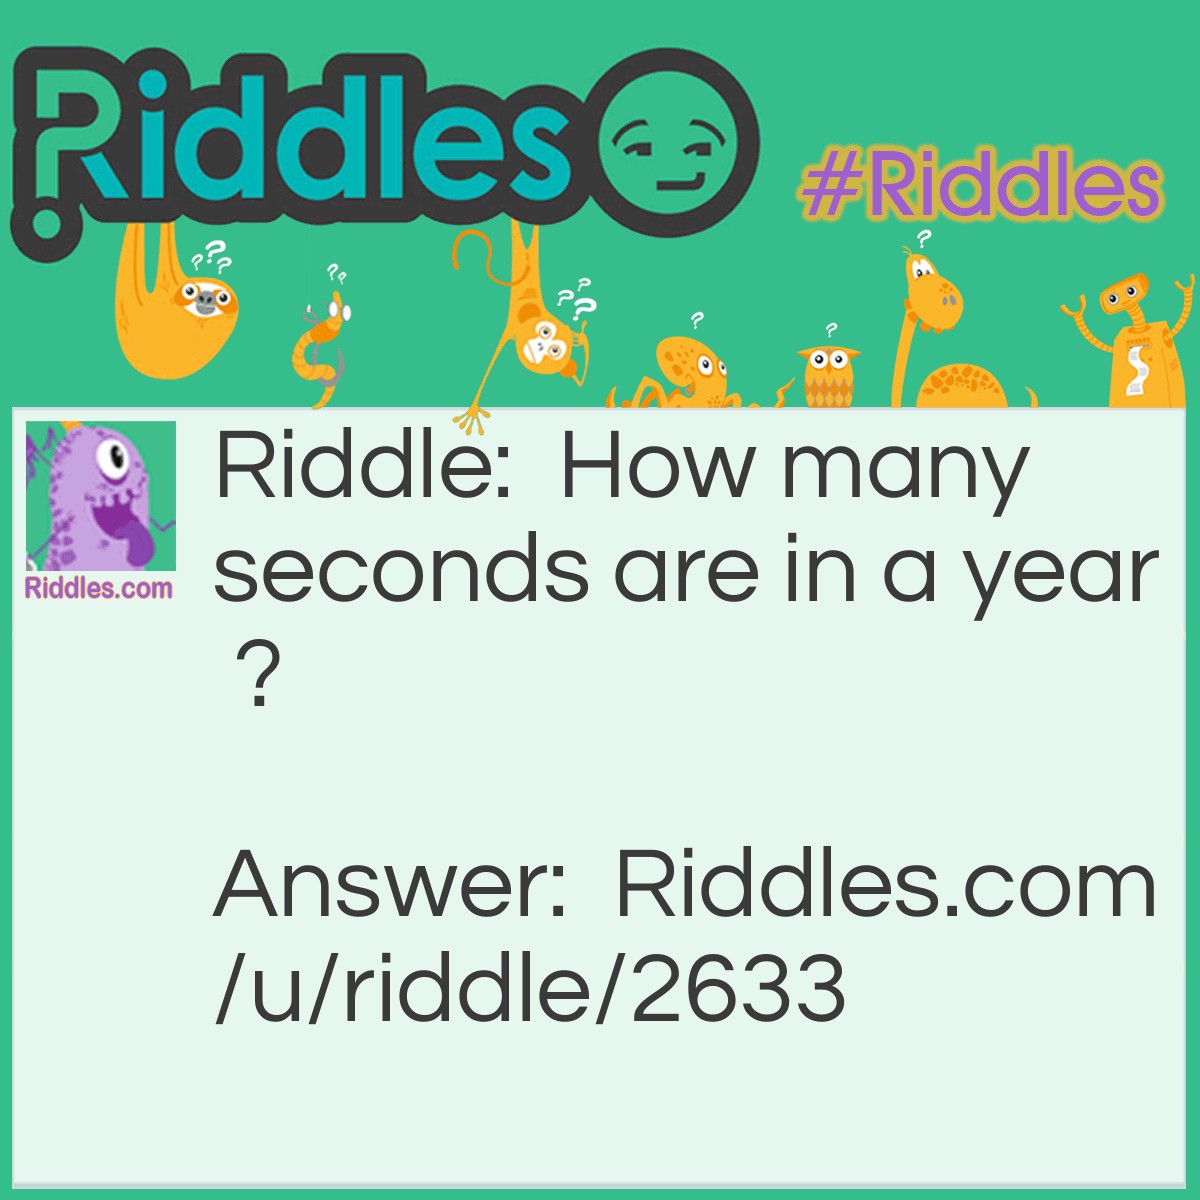 Riddle: How many seconds are in a year ? Answer: 12 January 2nd February 2nd March 2nd April 2nd may 2nd......